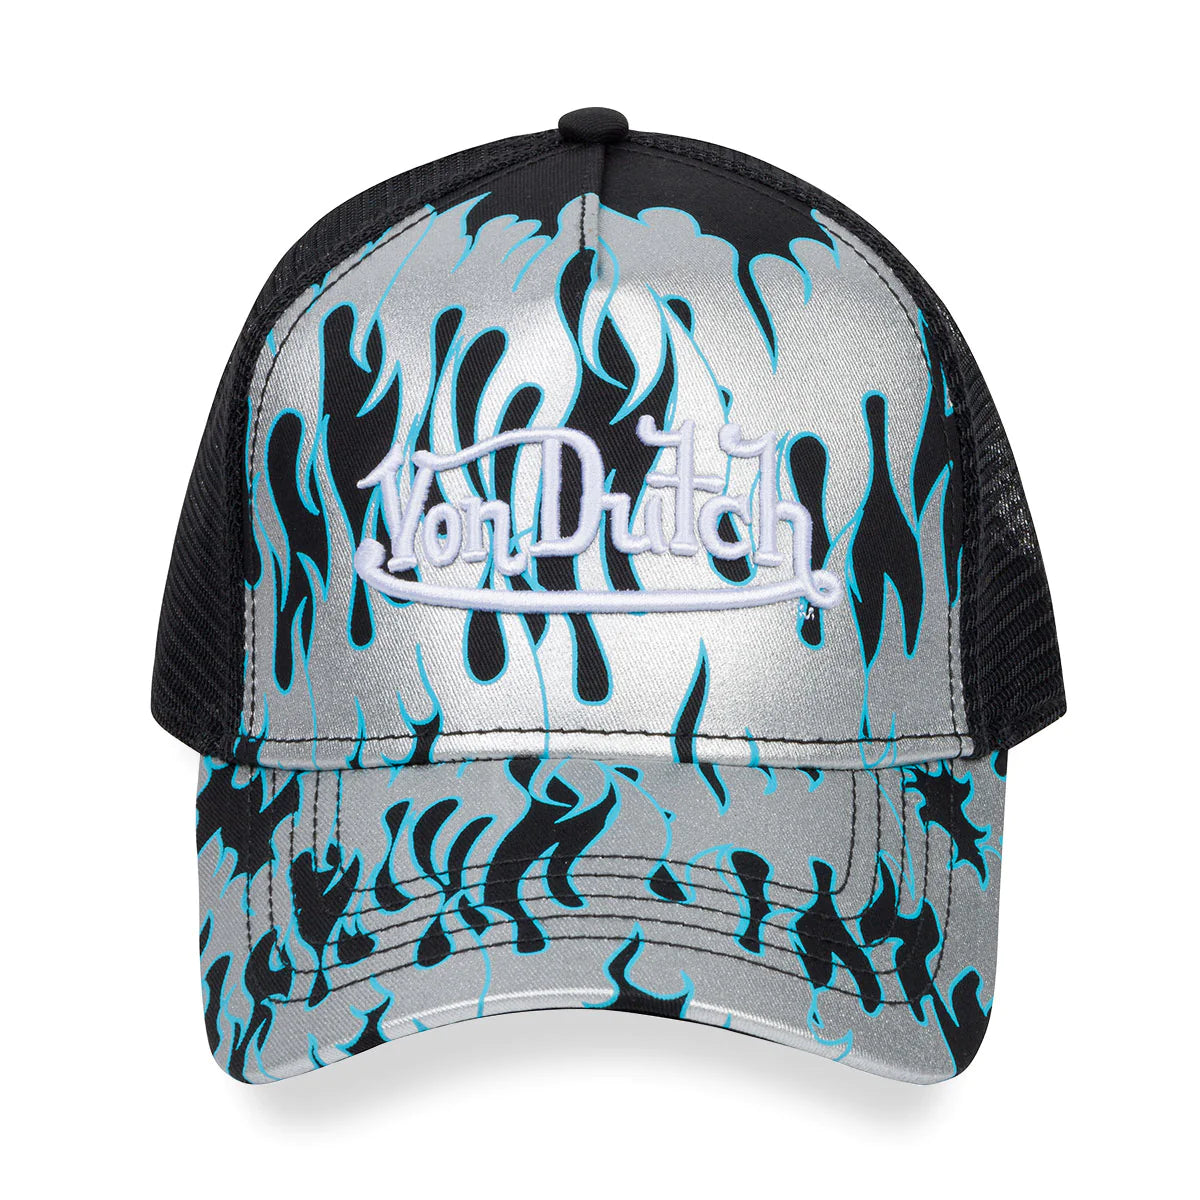 Classic snapback trucker hat with flame graphic pattern in silver blue pearl and embroidered White Von Dutch logo on front